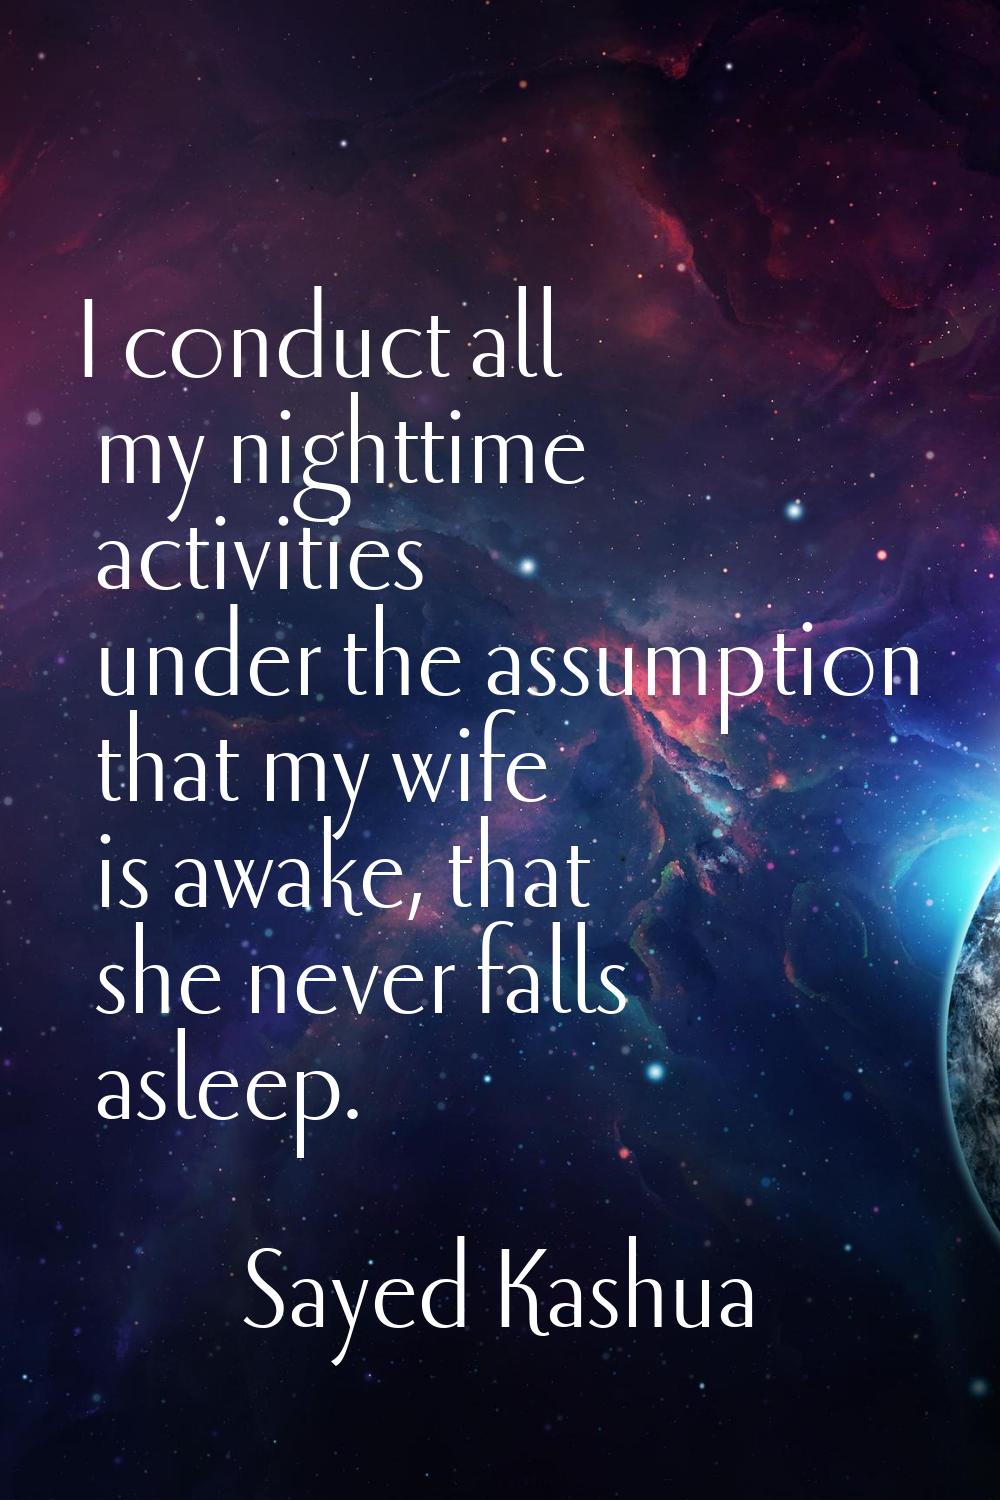 I conduct all my nighttime activities under the assumption that my wife is awake, that she never fa